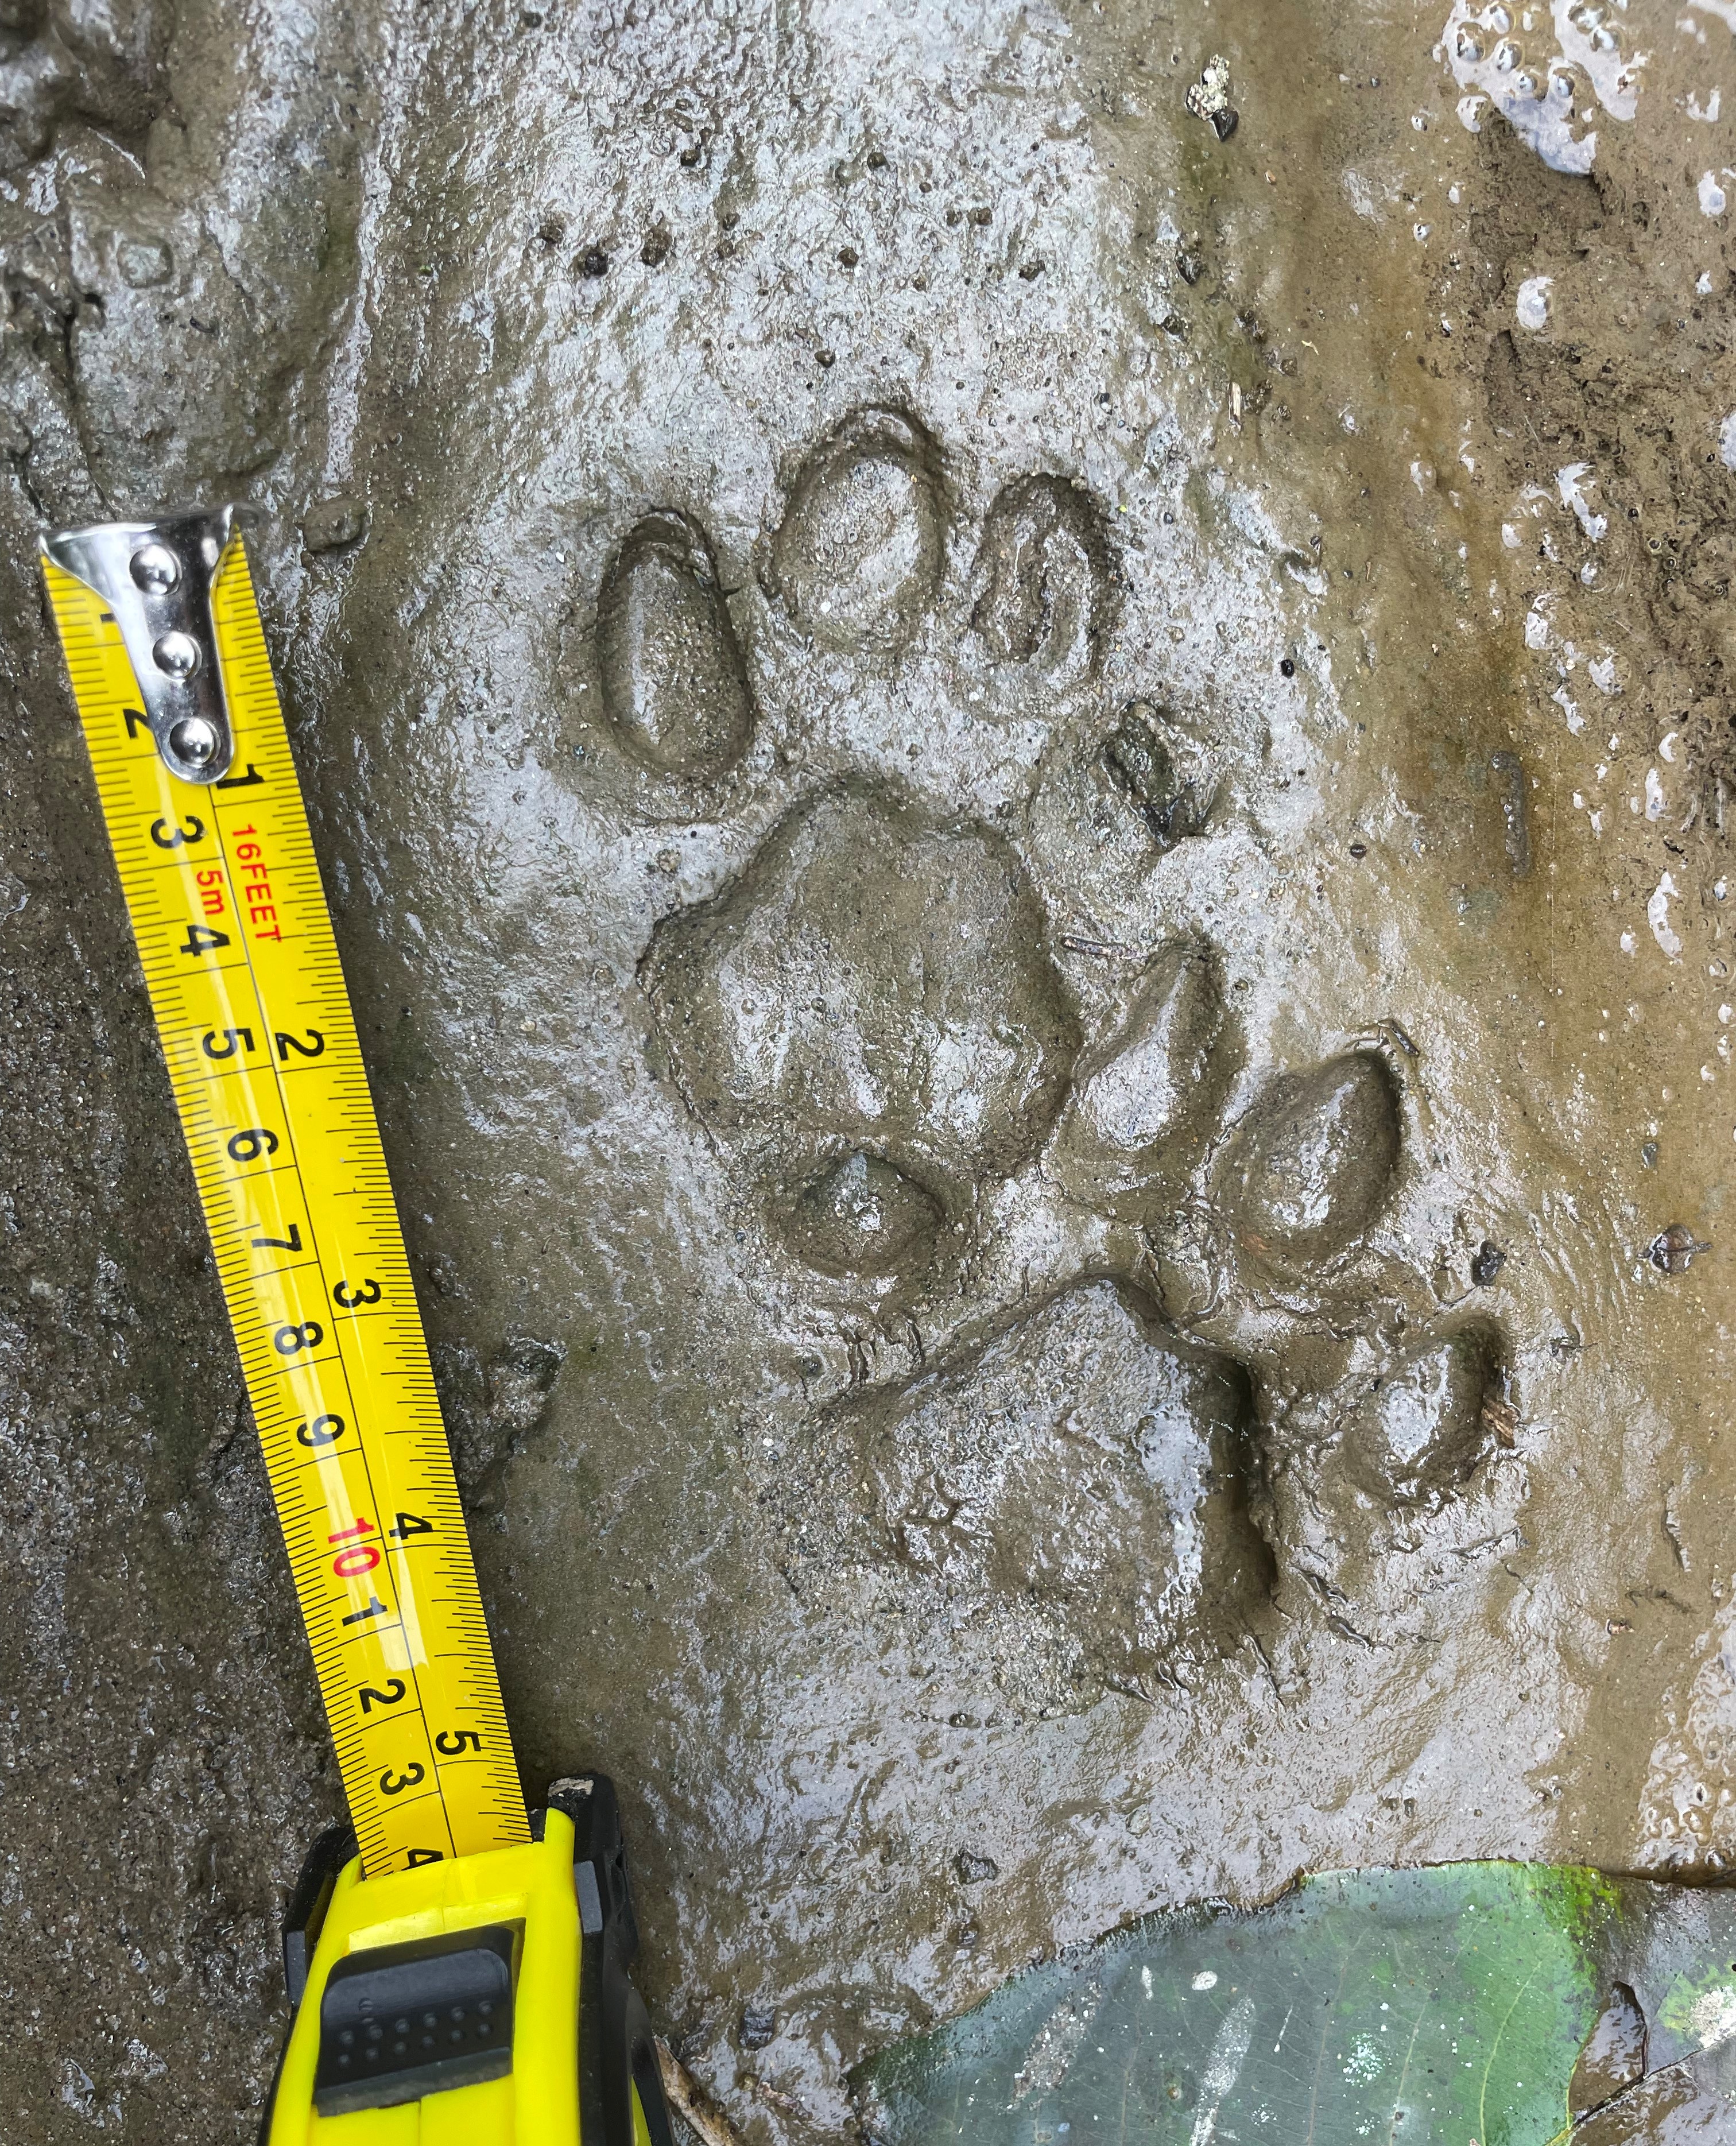 Dhole tracks with measuring tape by Martin Gilbert 